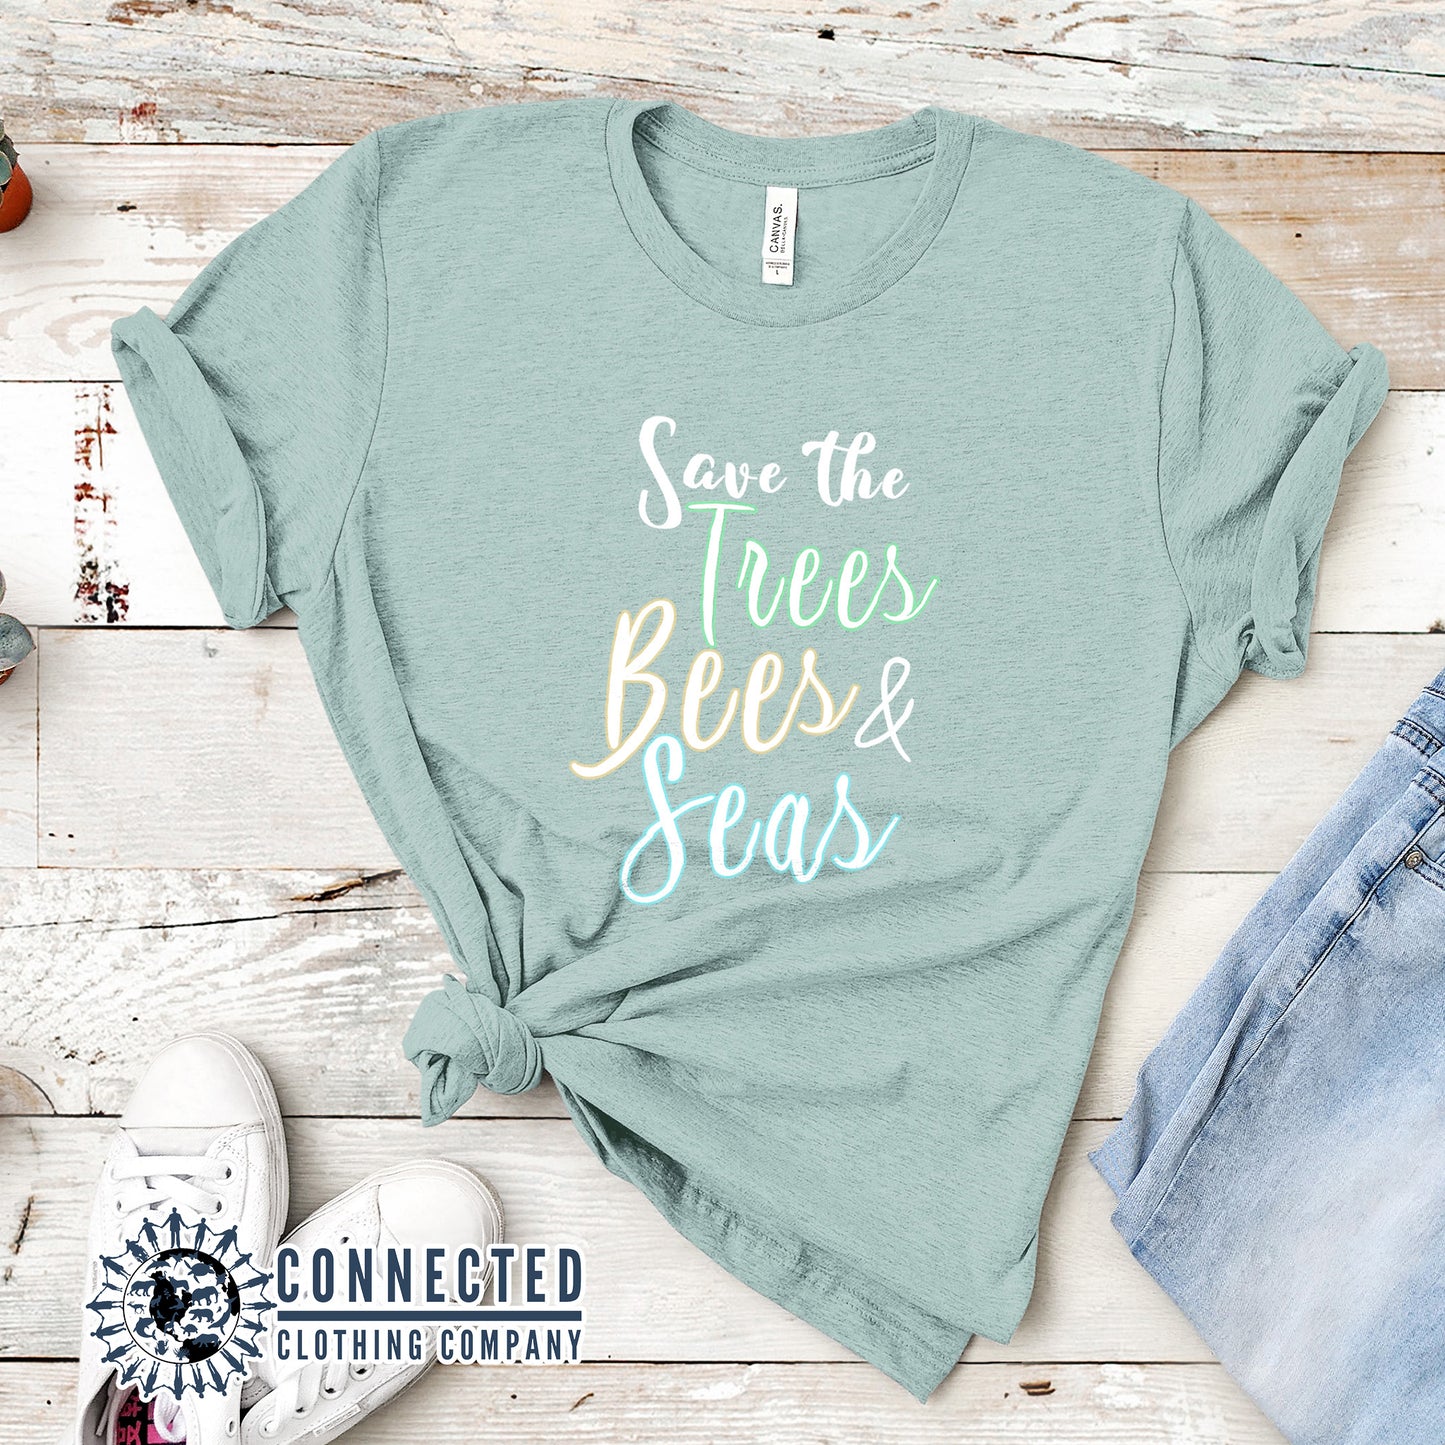 Heather Prism Dusty Blue Save The Trees Bees & Seas Short-Sleeve Tee - Connected Clothing Company - Ethically and Sustainably Made - 10% donated to ocean conservation